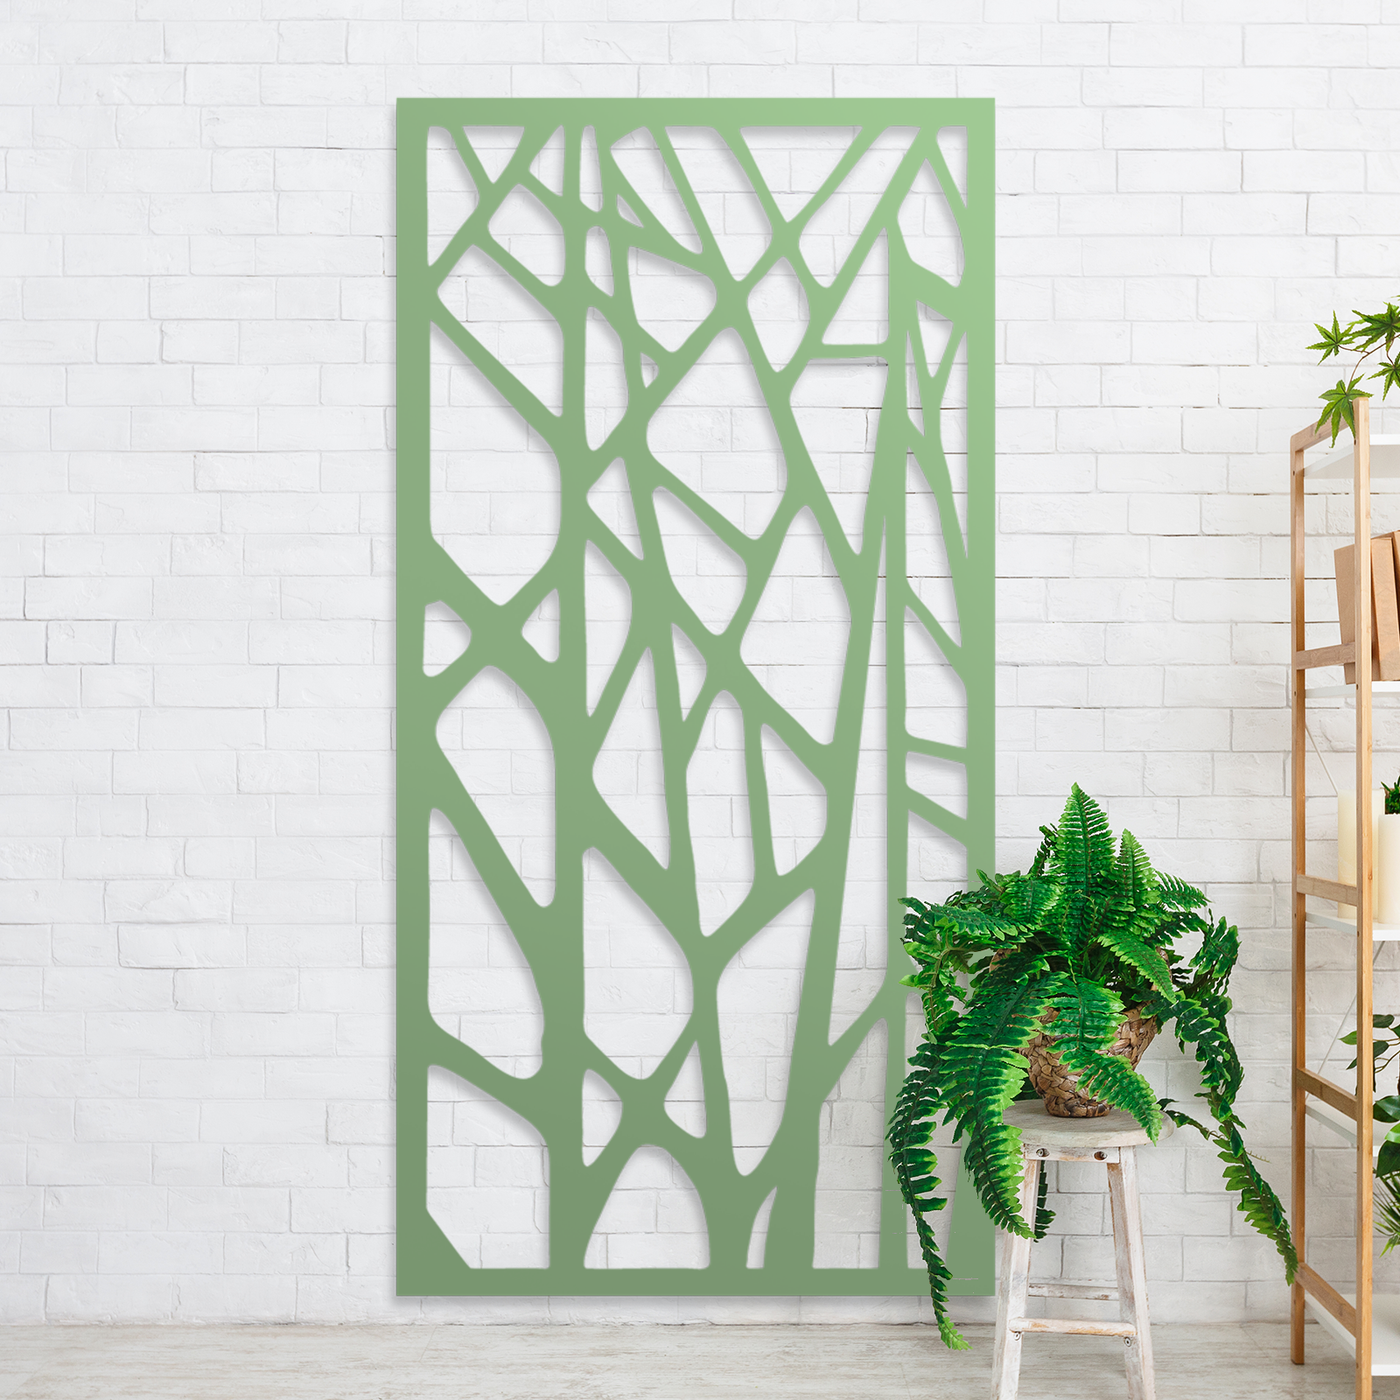 Giraffe Metal Screen: The Perfect Addition to Any Outdoor Garden